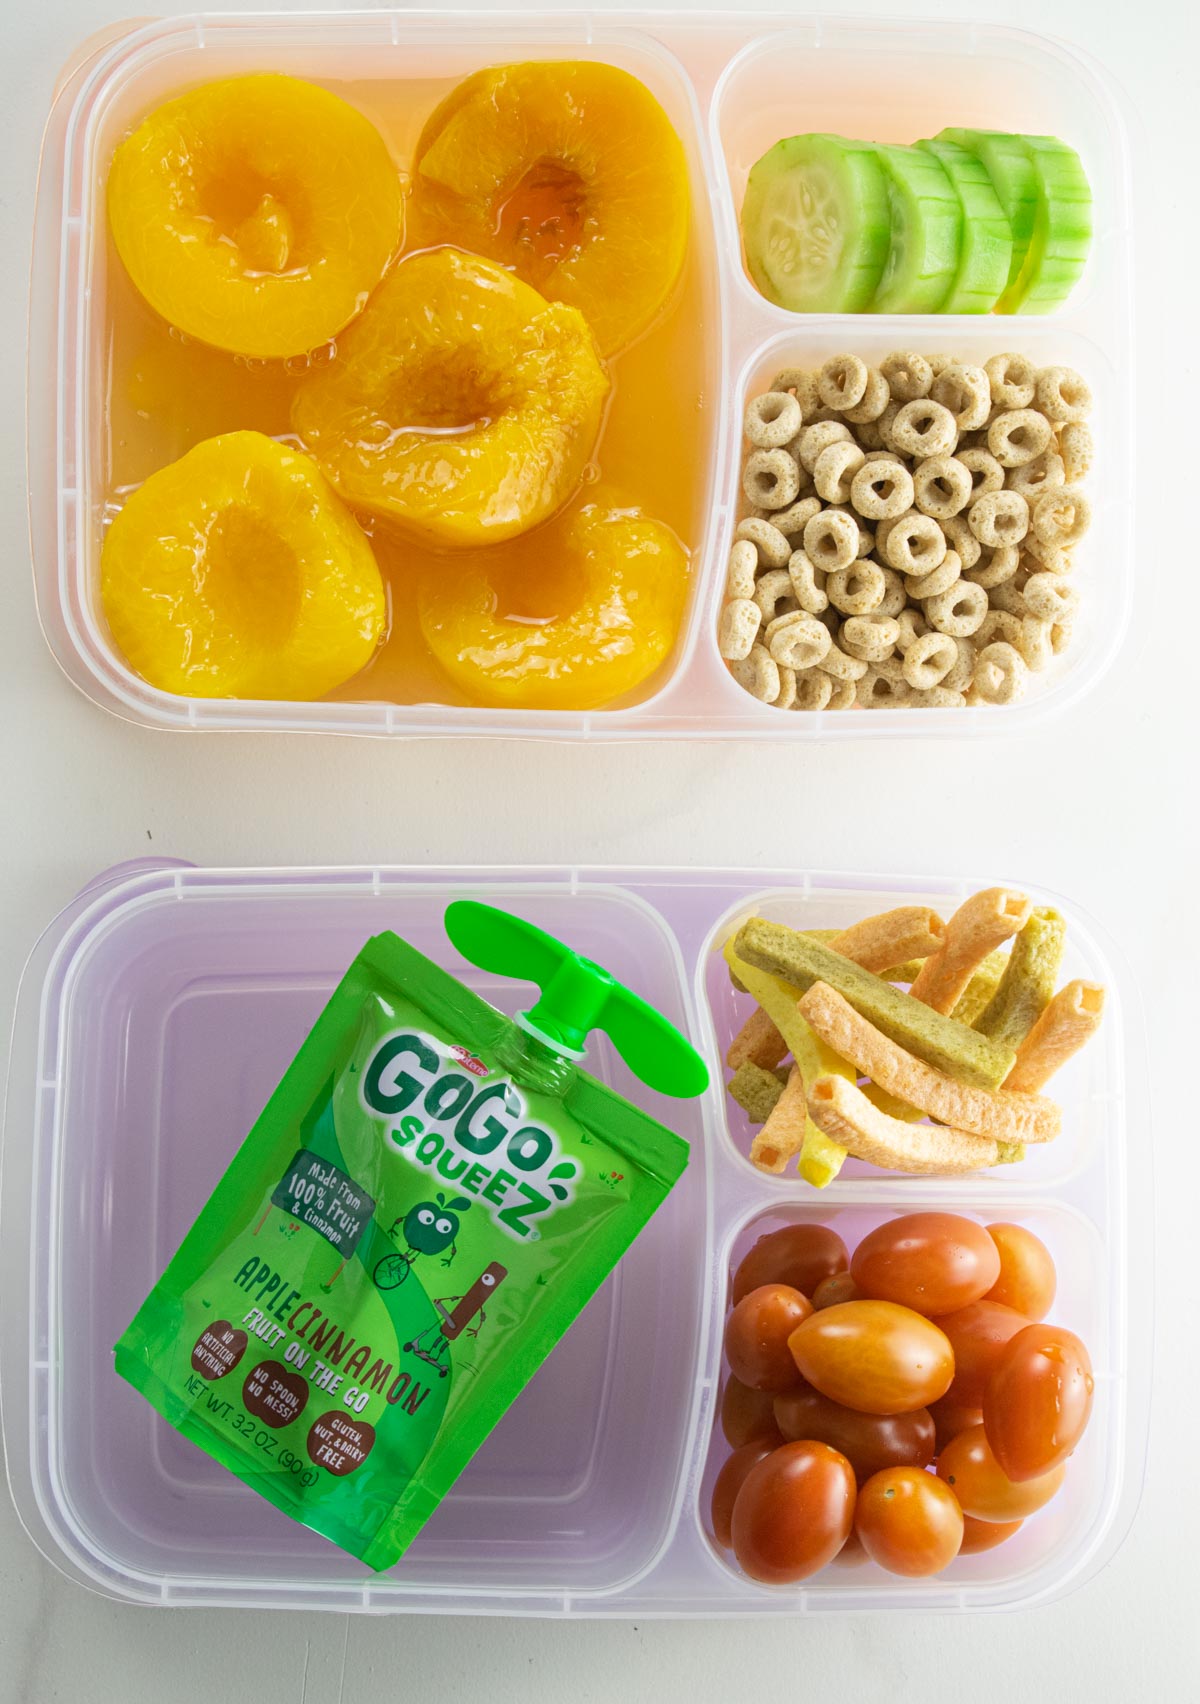 peaches, cucumbers, cheerios, gogo squeeze pouch, grape tomatoes, and veggies straws